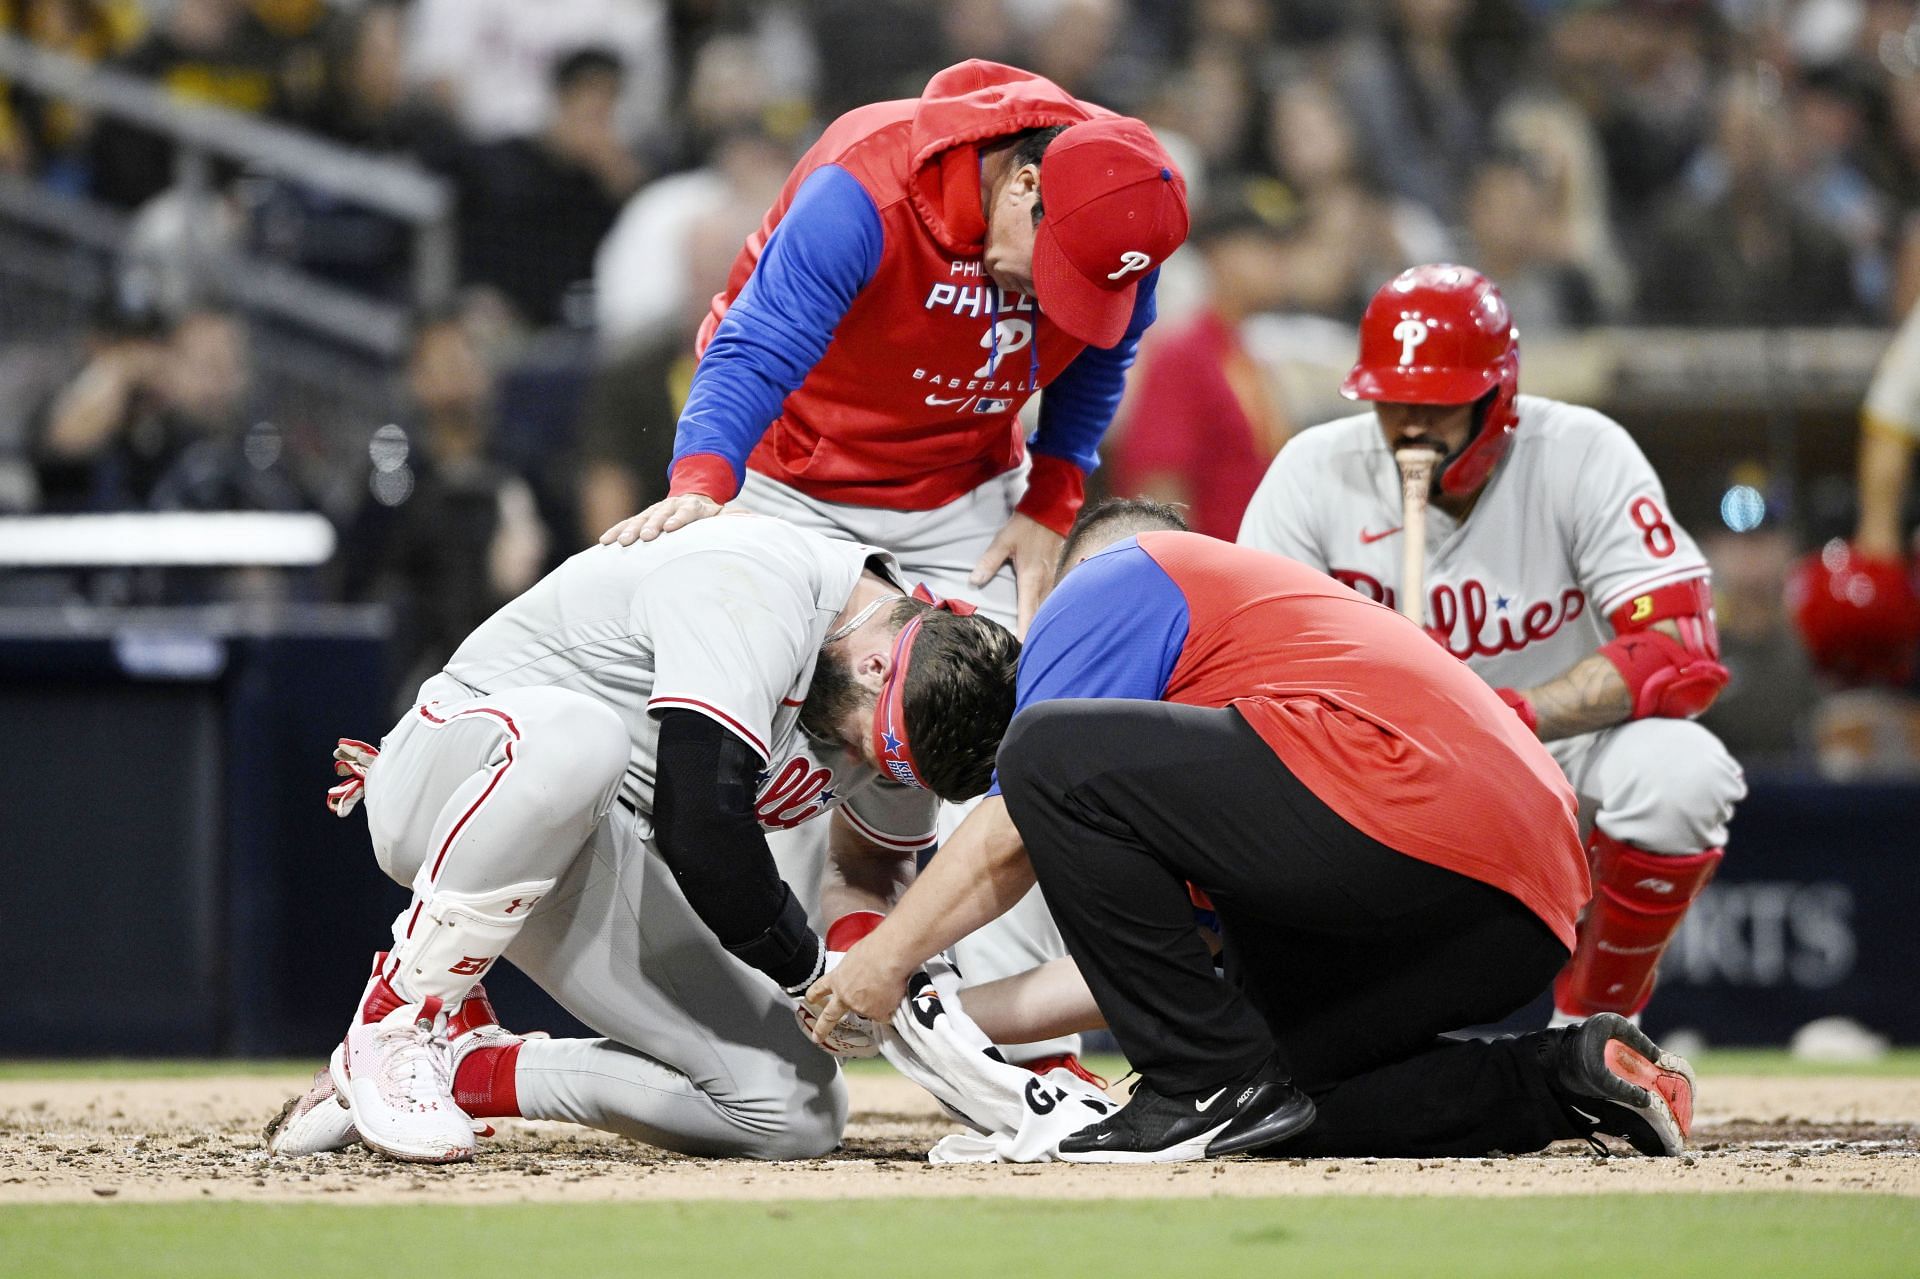 Bryce Harper is looked at after being hit with a pitch during the fourth inning of a baseball game against the San Diego Padres